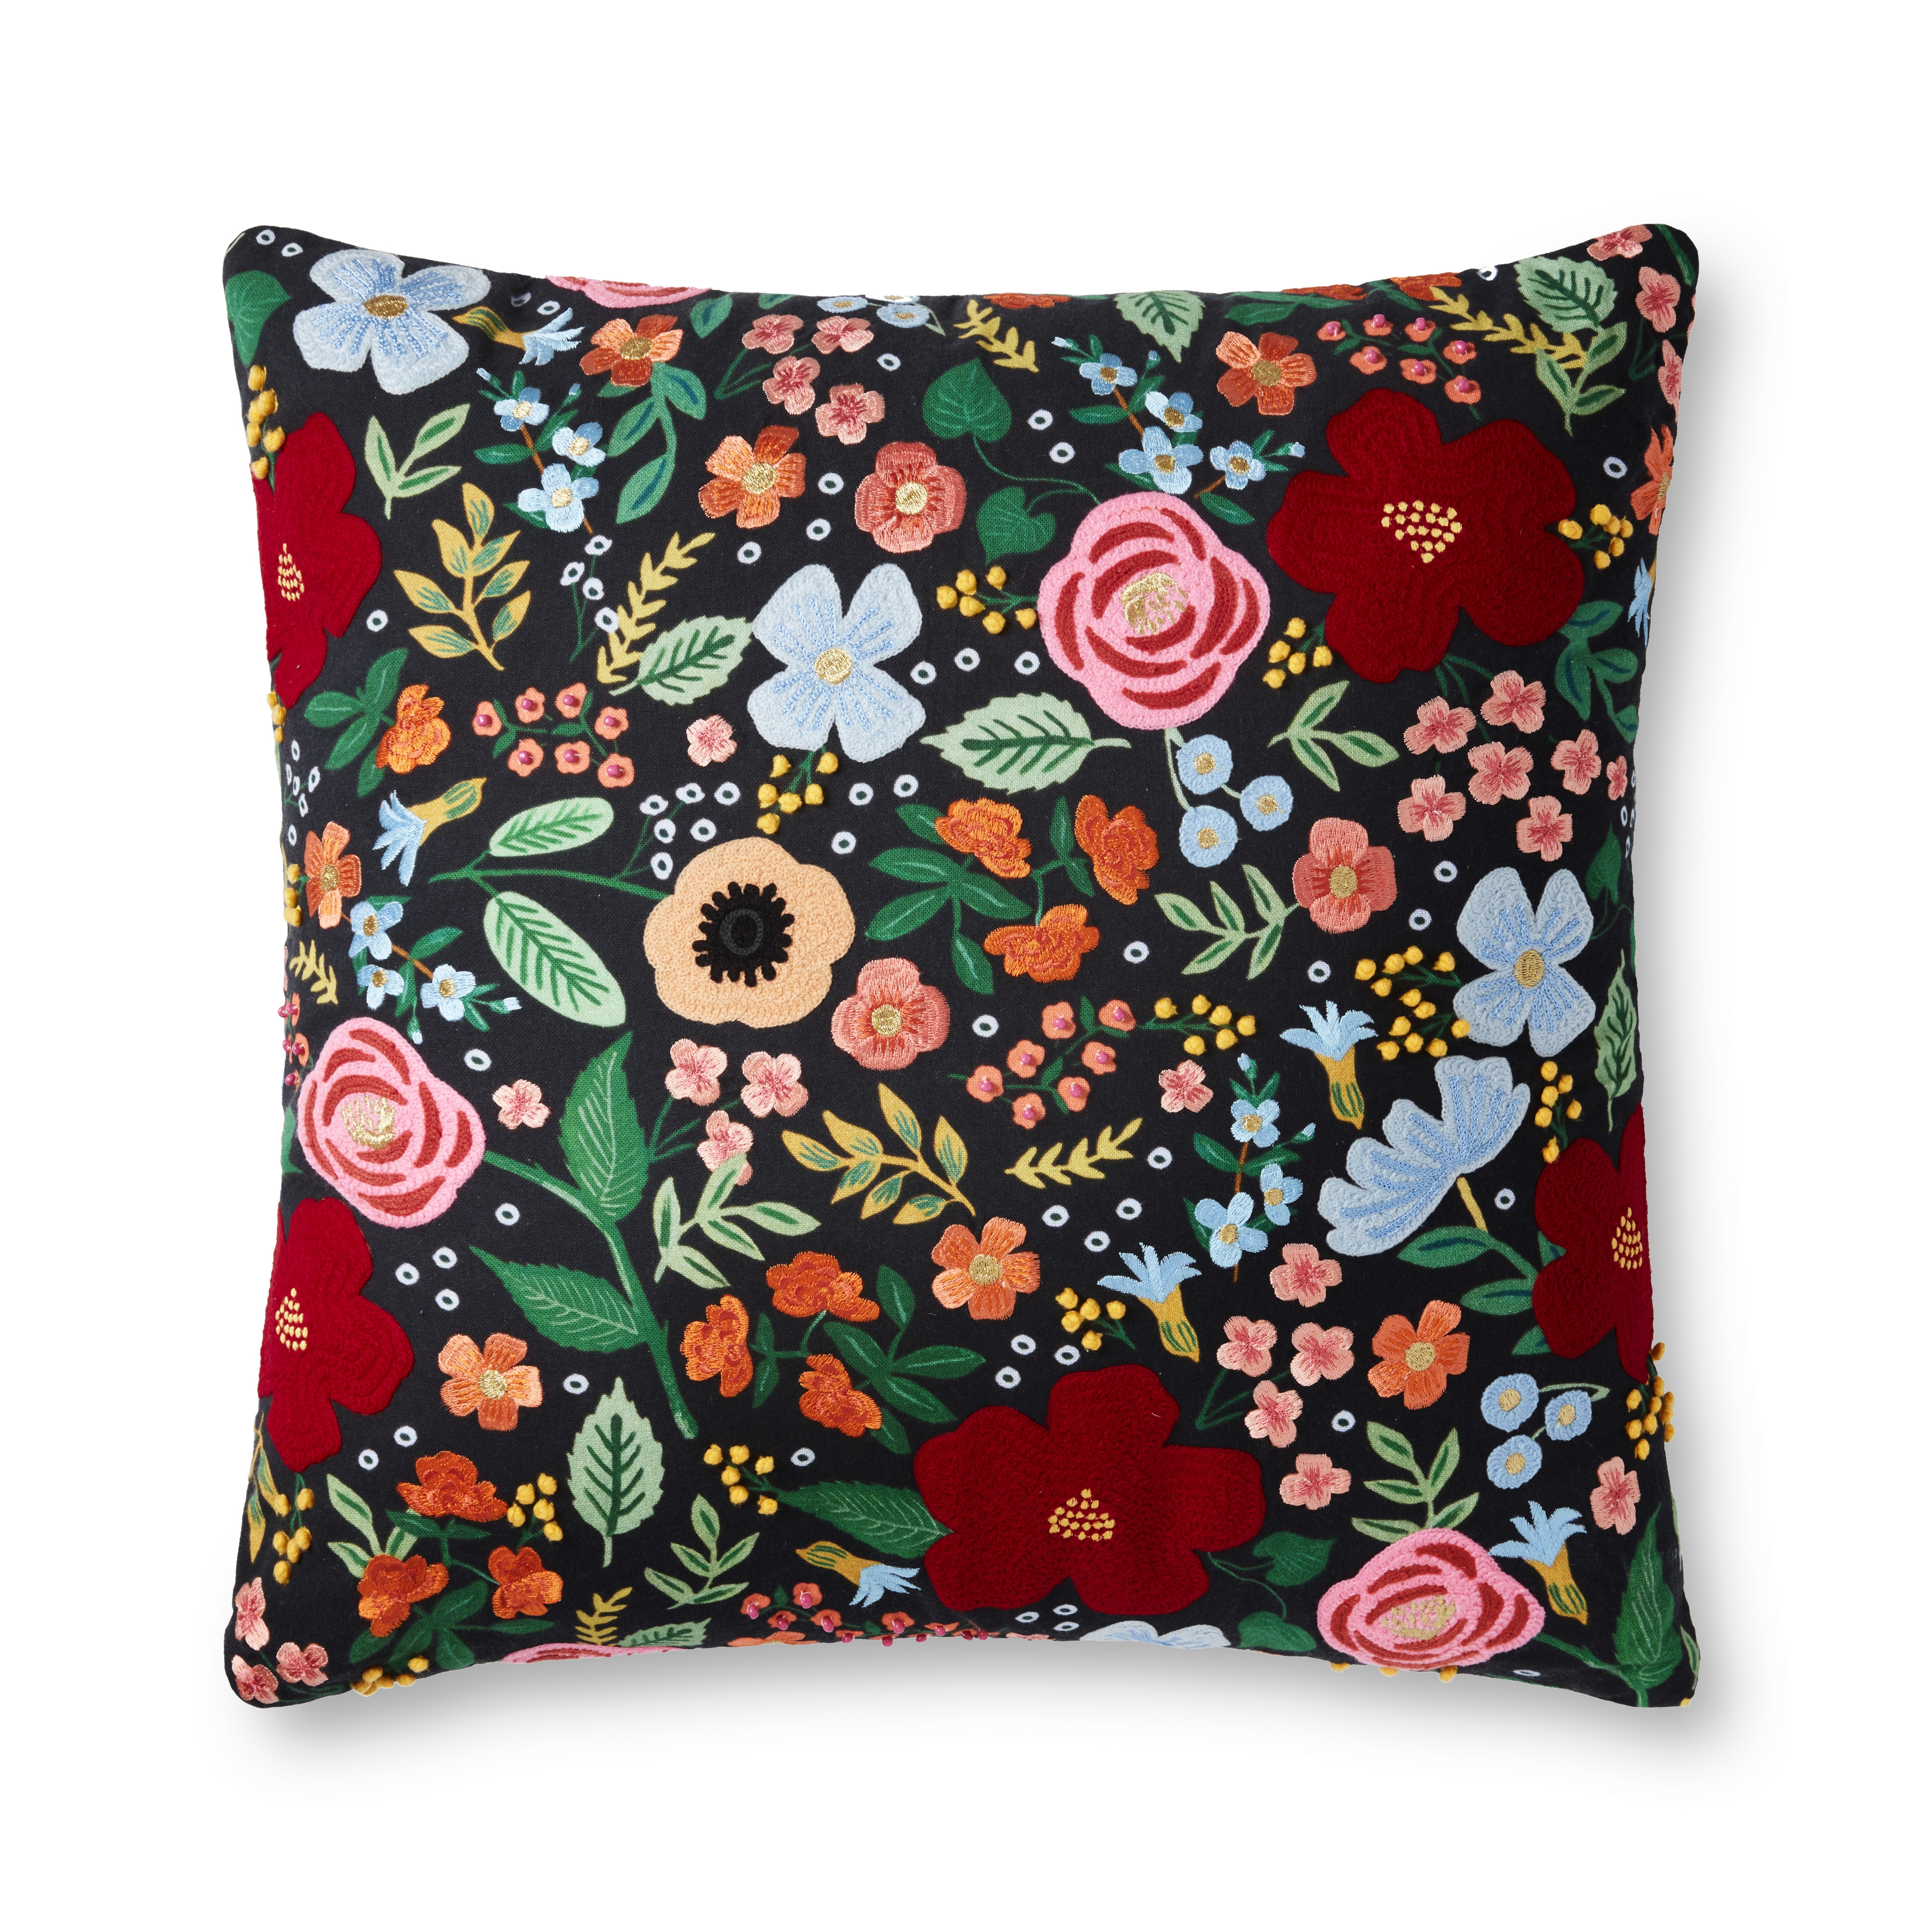 Rifle Paper Co. x Loloi Pillows P6059 Black / Multi 22" x 22" Cover Only - Image 0